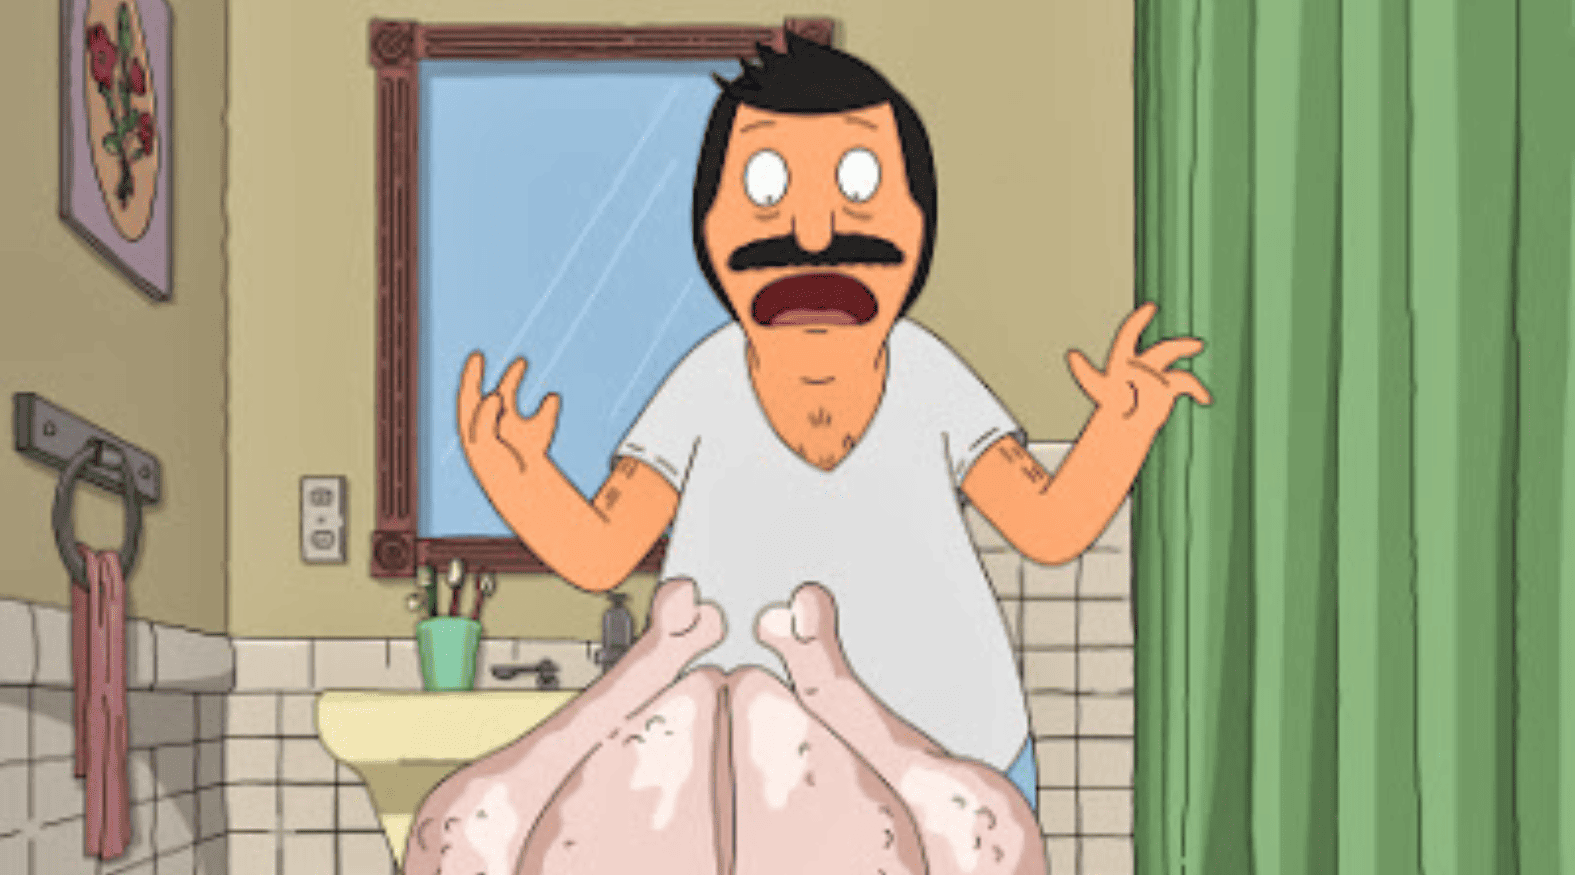 An animated man stands over a turkey in a bathroom in this image from Wilo Productions/Buck & Millie Productions.